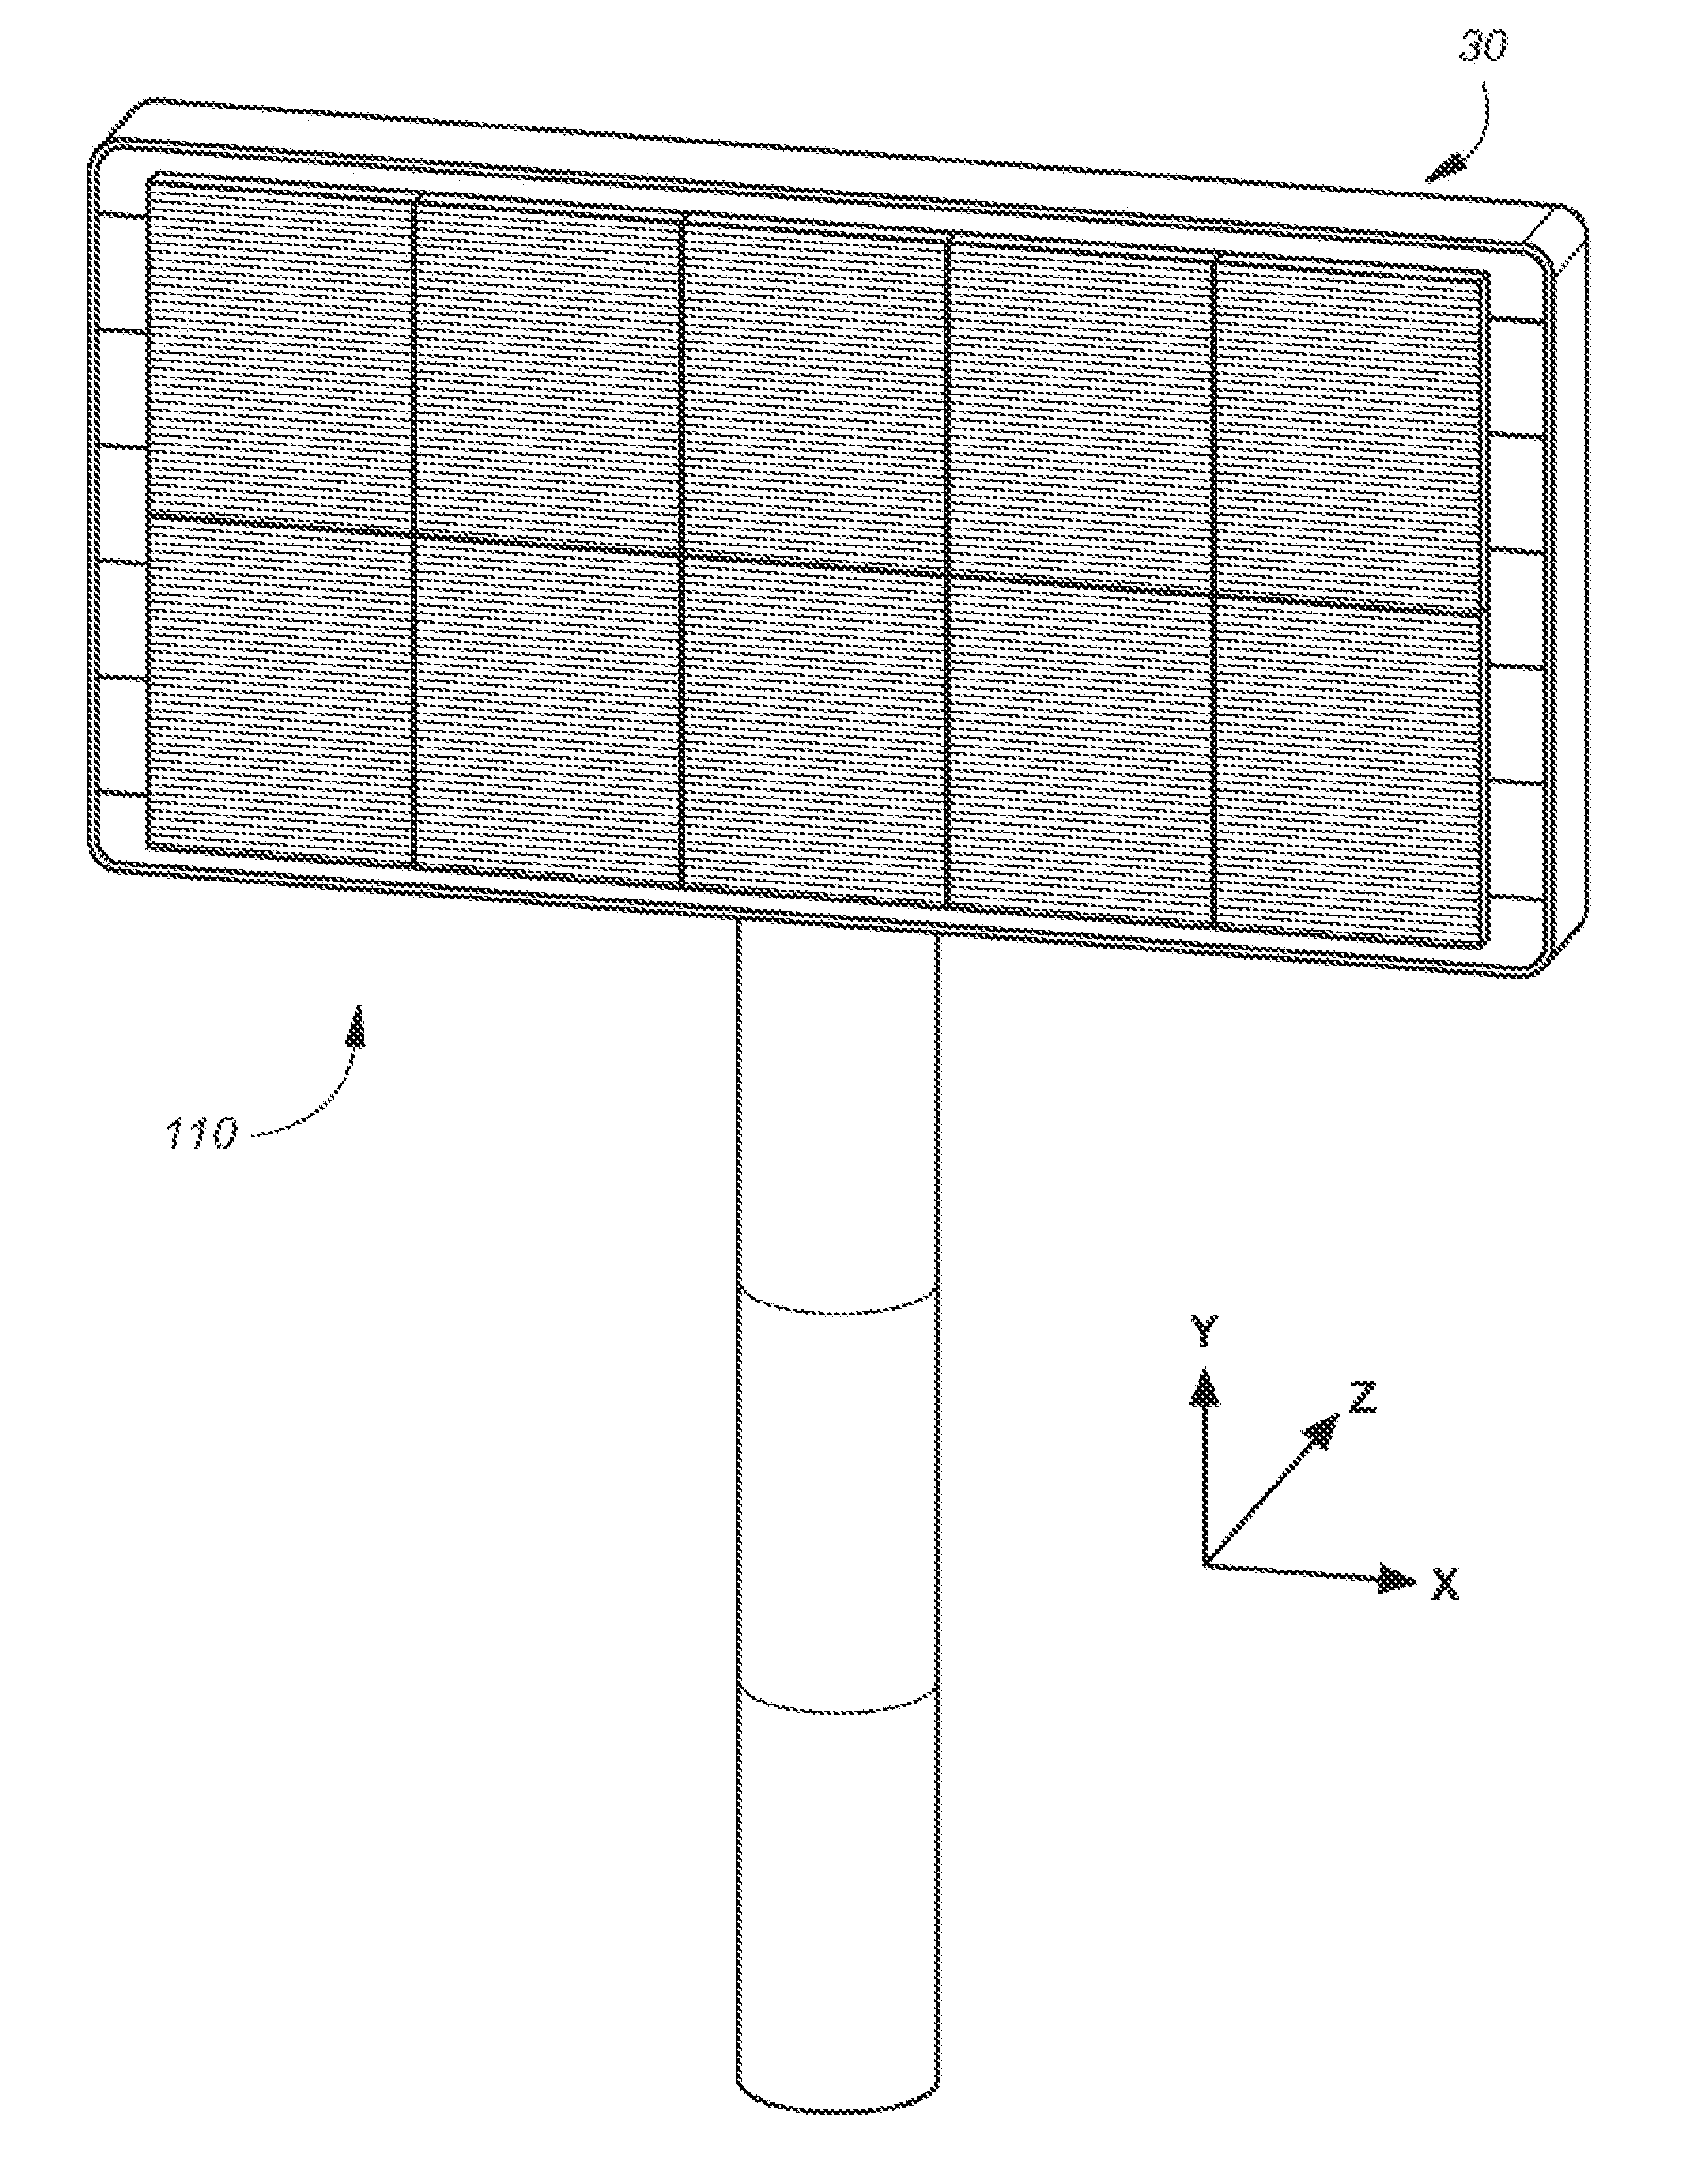 Sectional sign assembly and installation kit and method of using same